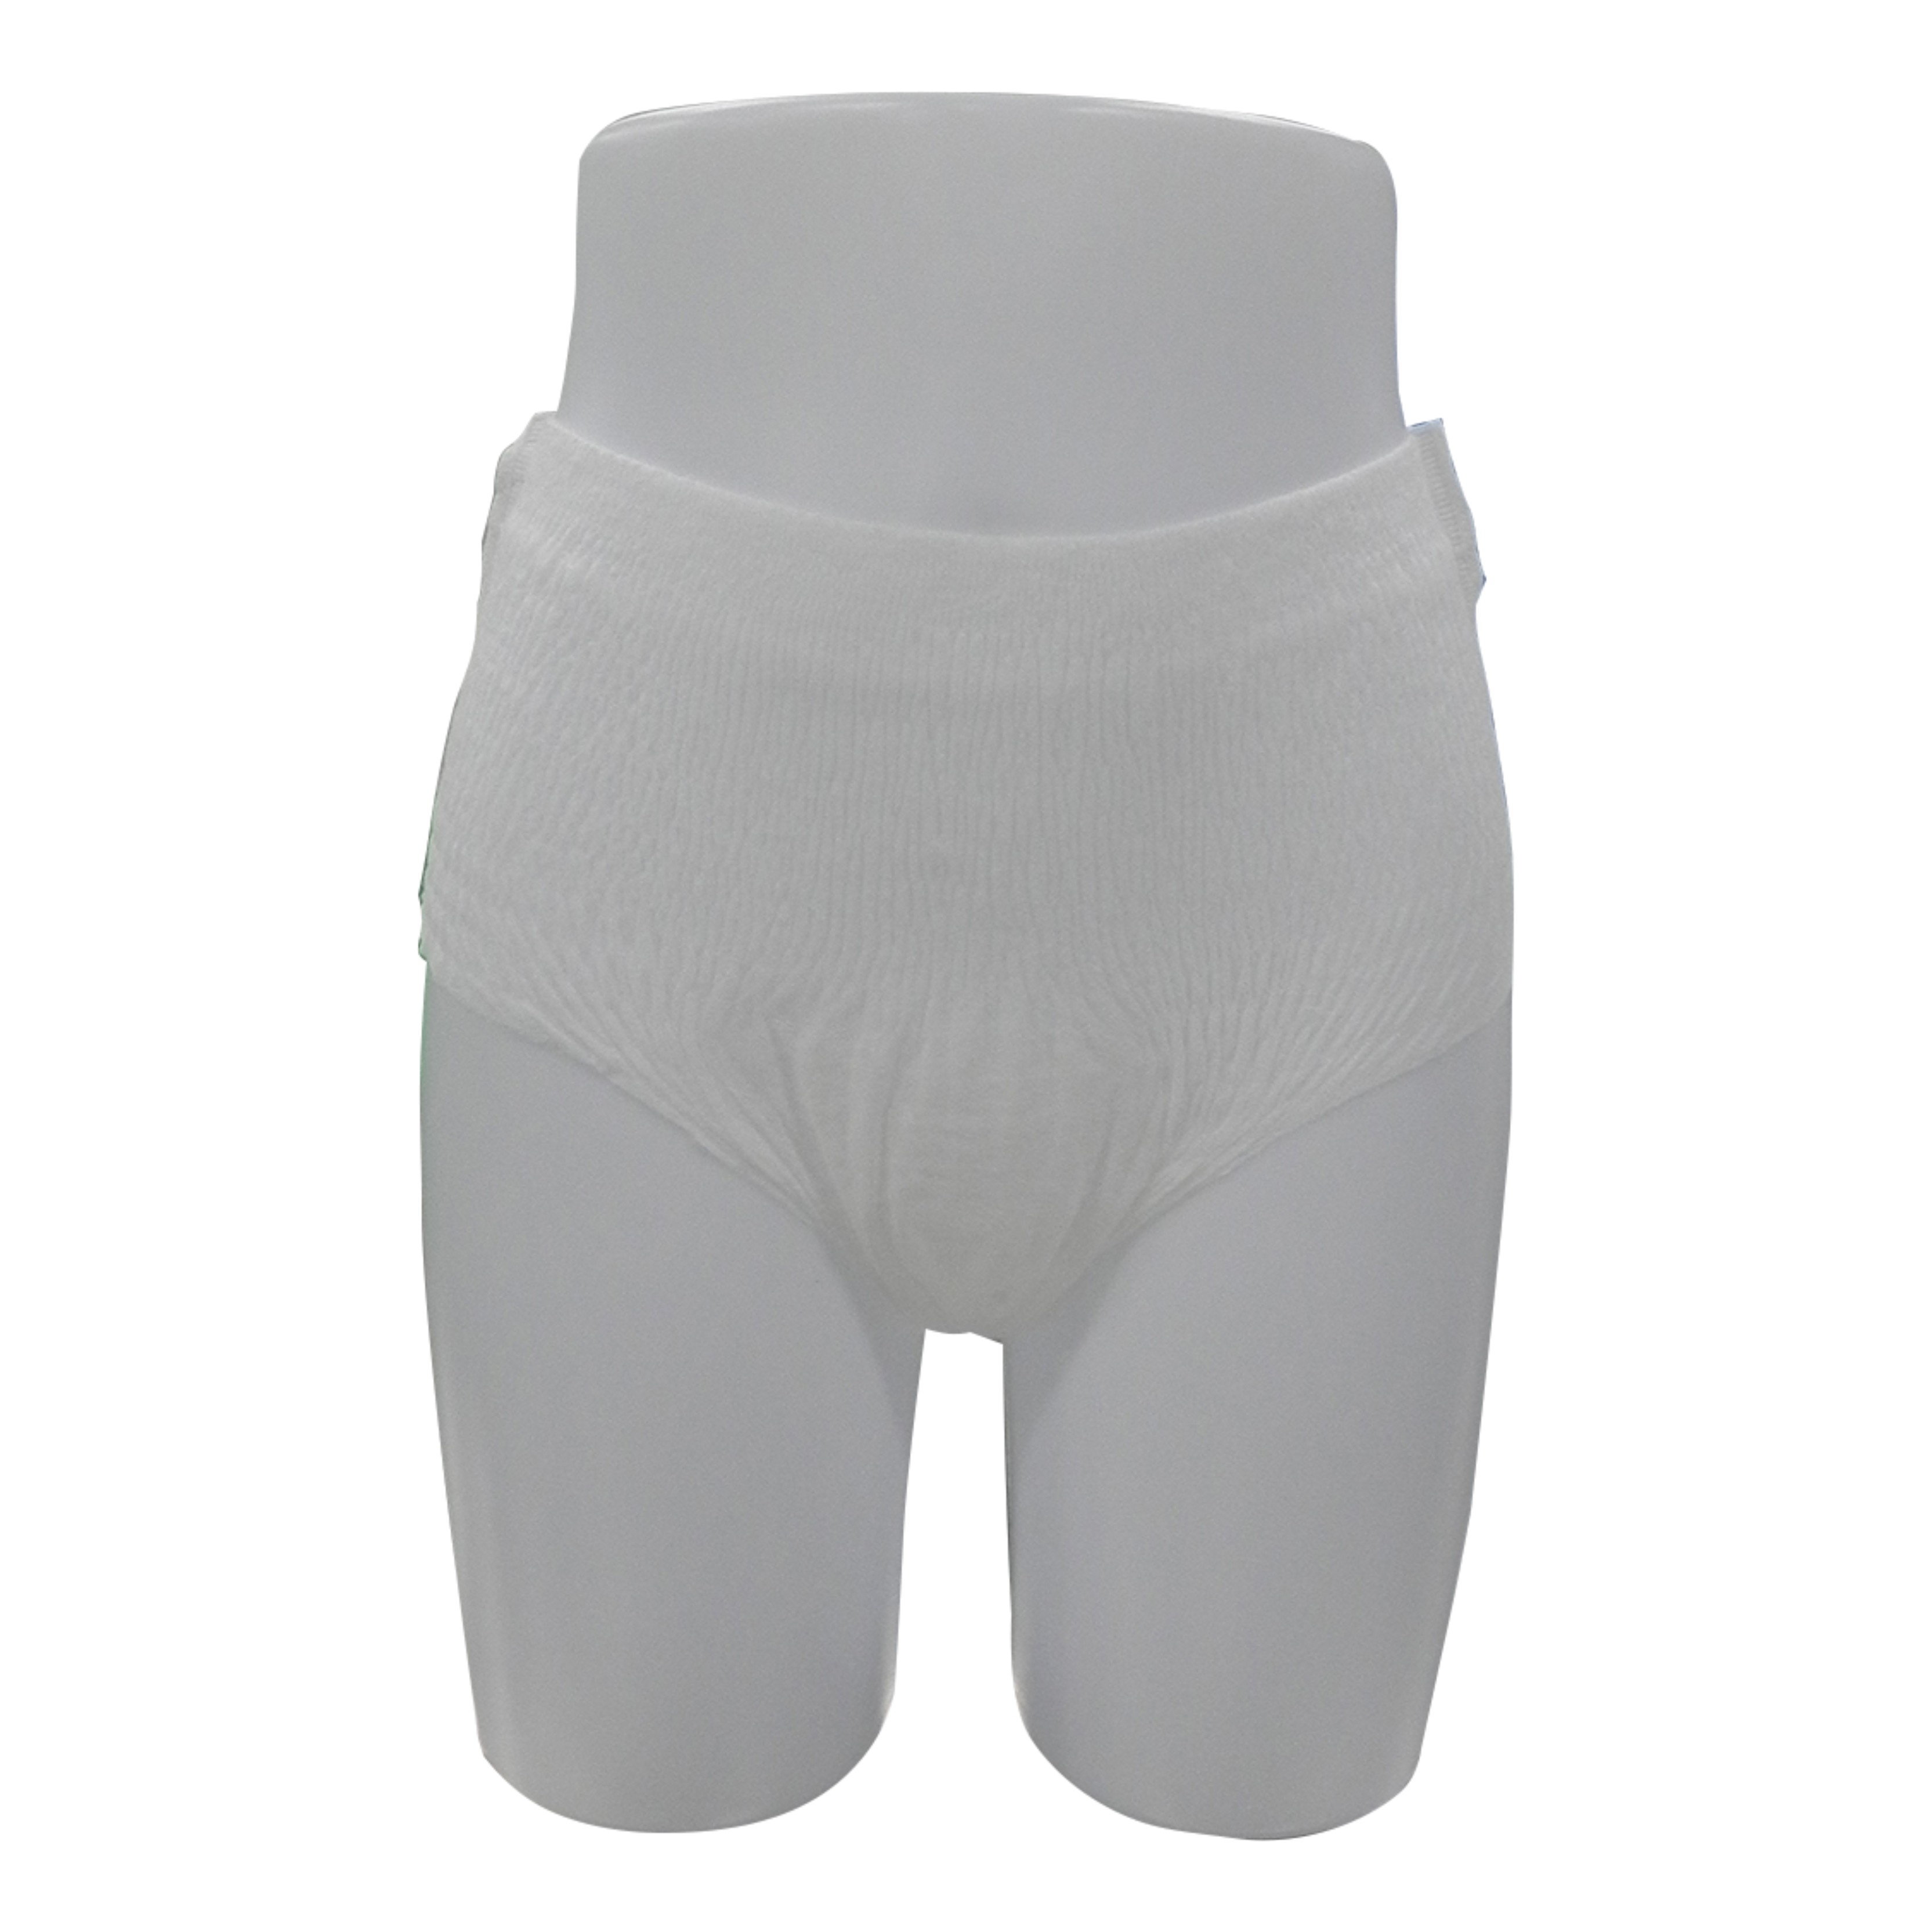 OEM/ODM China Disposable Briefs For Incontinence - super sleepy lady women sanitary napkins female period pants in pull up style – Yoho